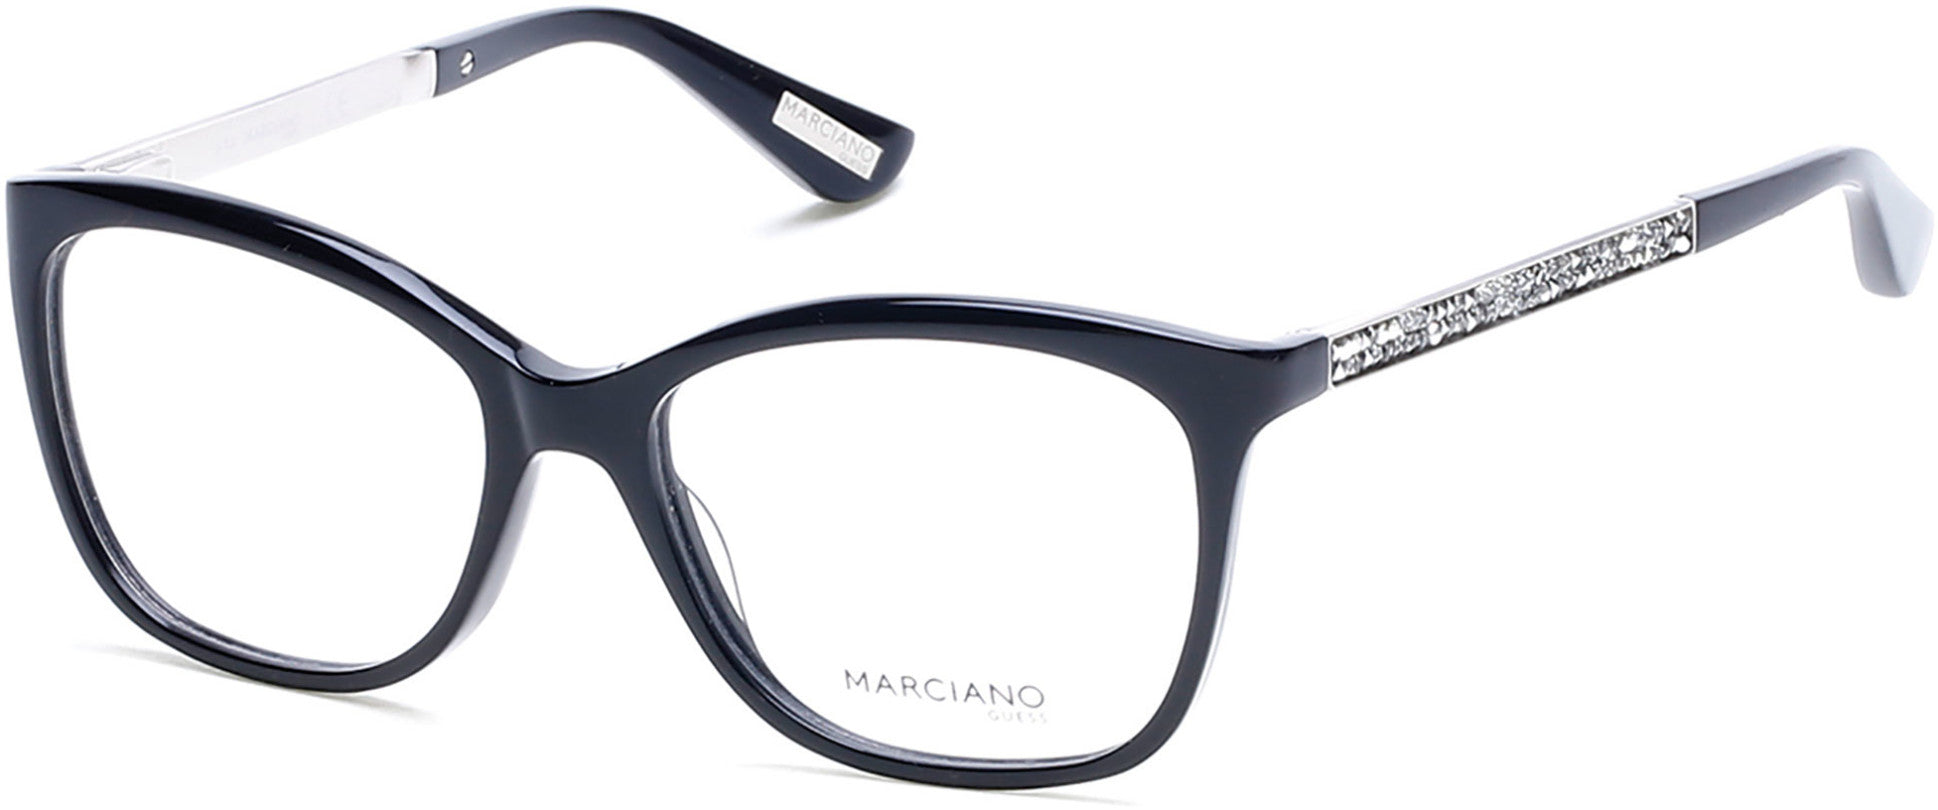 Guess By Marciano GM0281 Square Eyeglasses 001-001 - Shiny Black